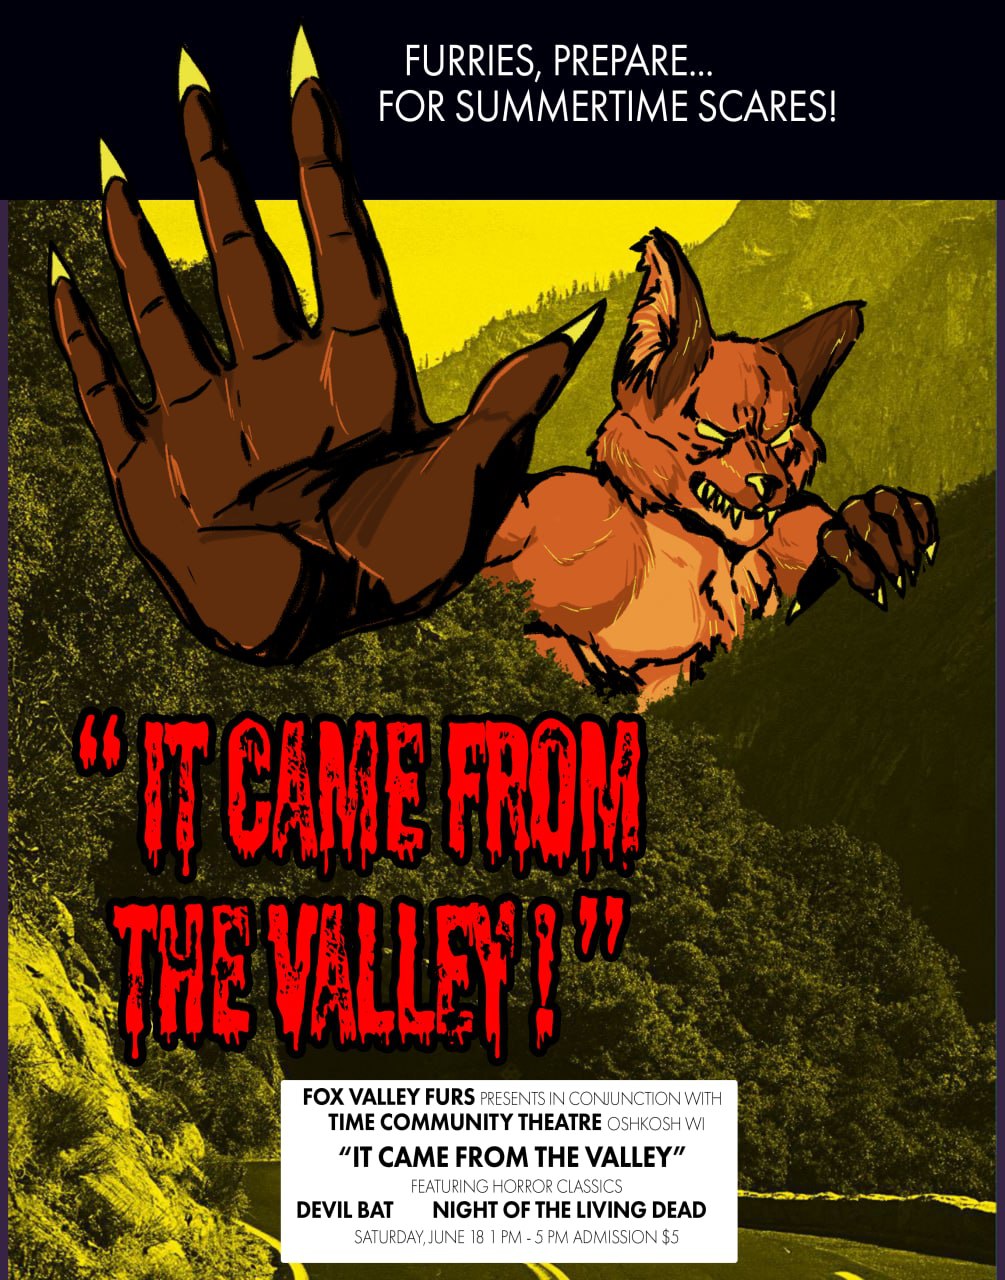 It came from the valley